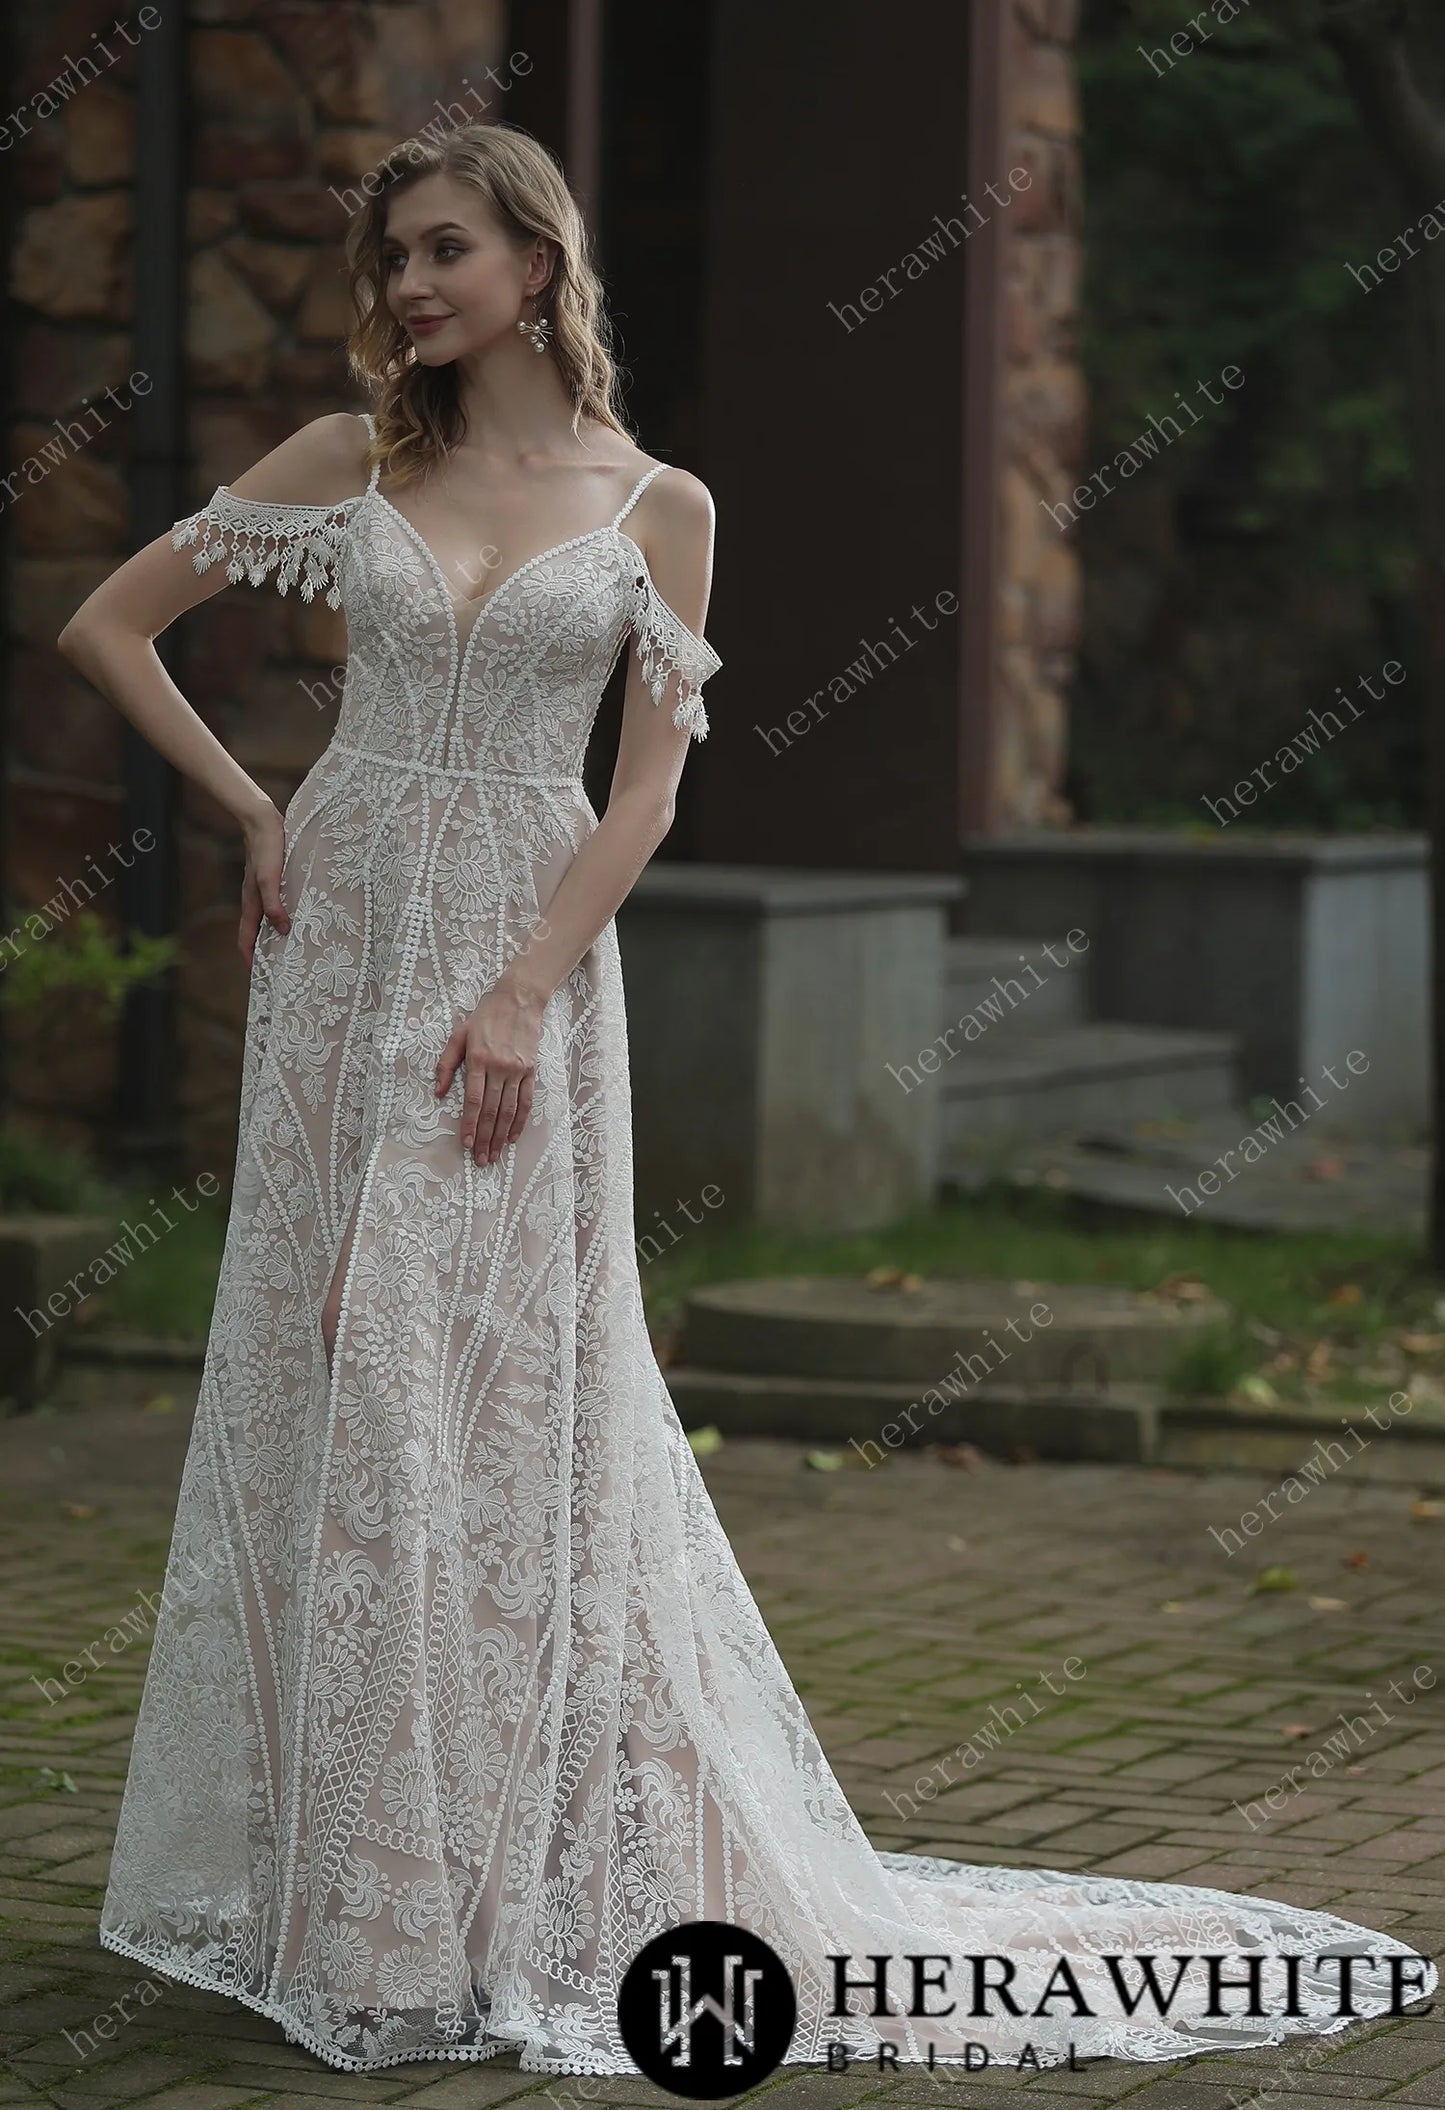 Beach Bohemian Lace Wedding Dress With Plunging V-Neckline